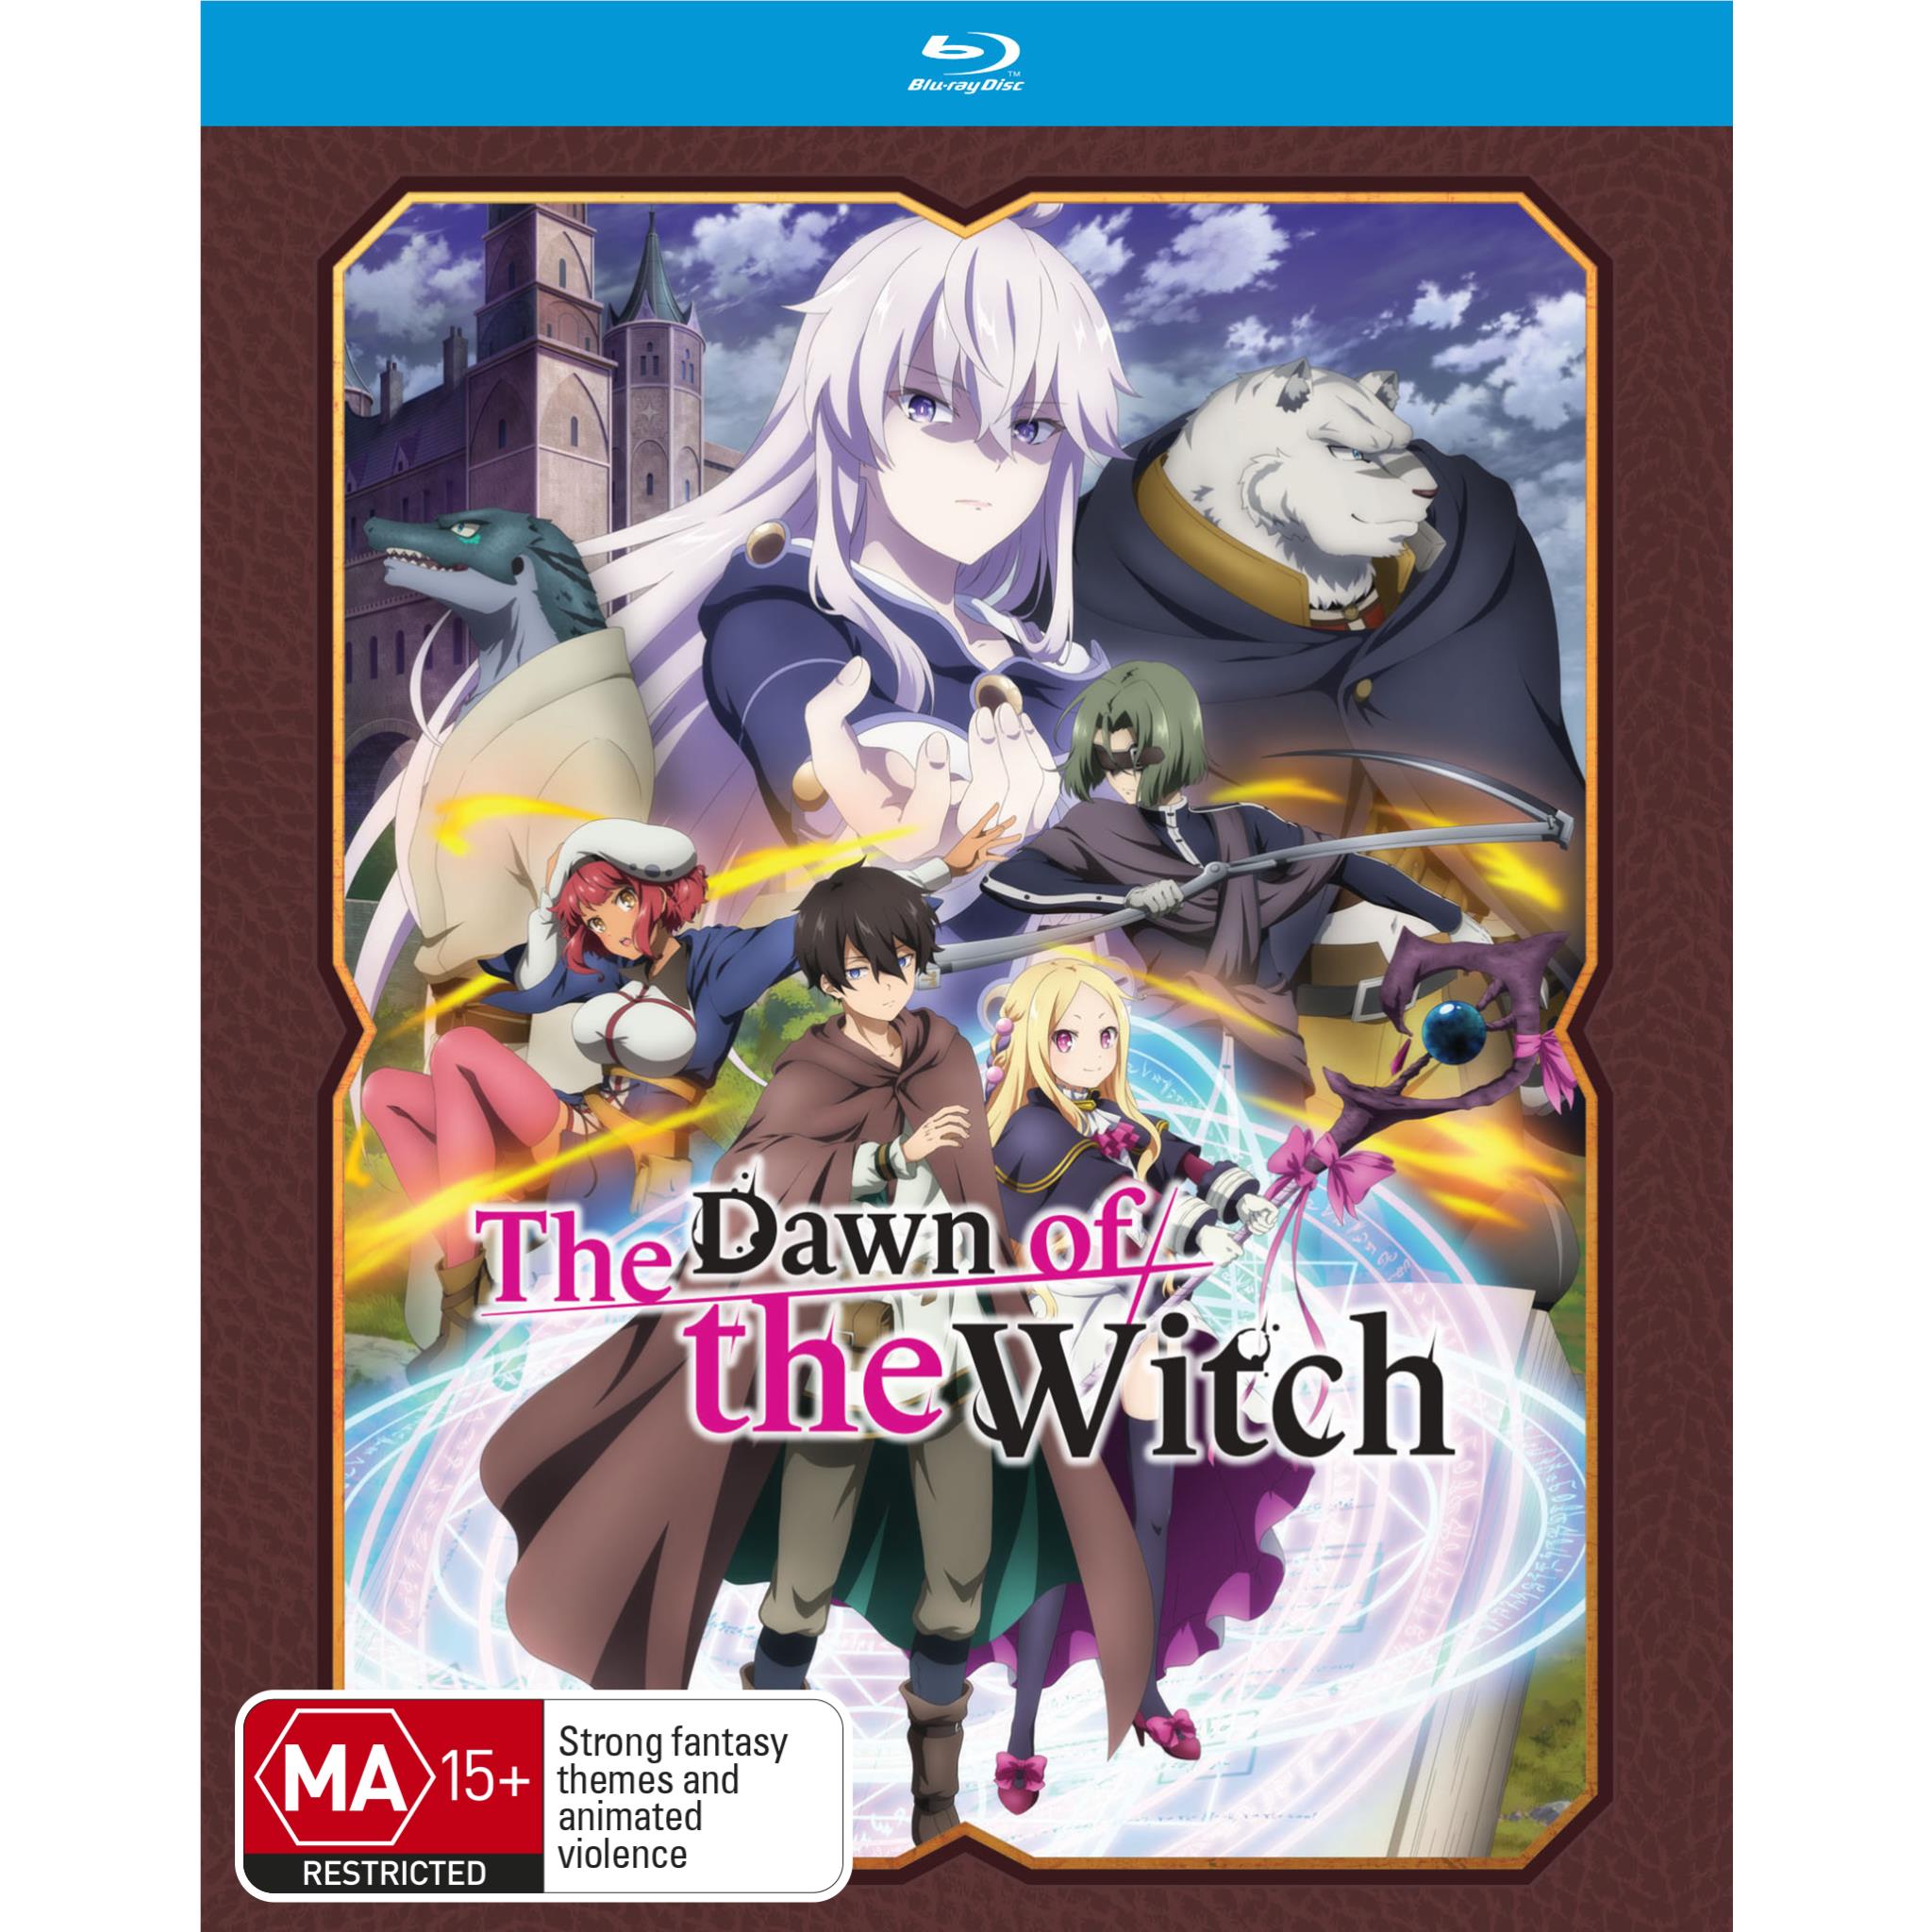 The Dawn of the Witch Reveals The Extent of Zeros Power Loss